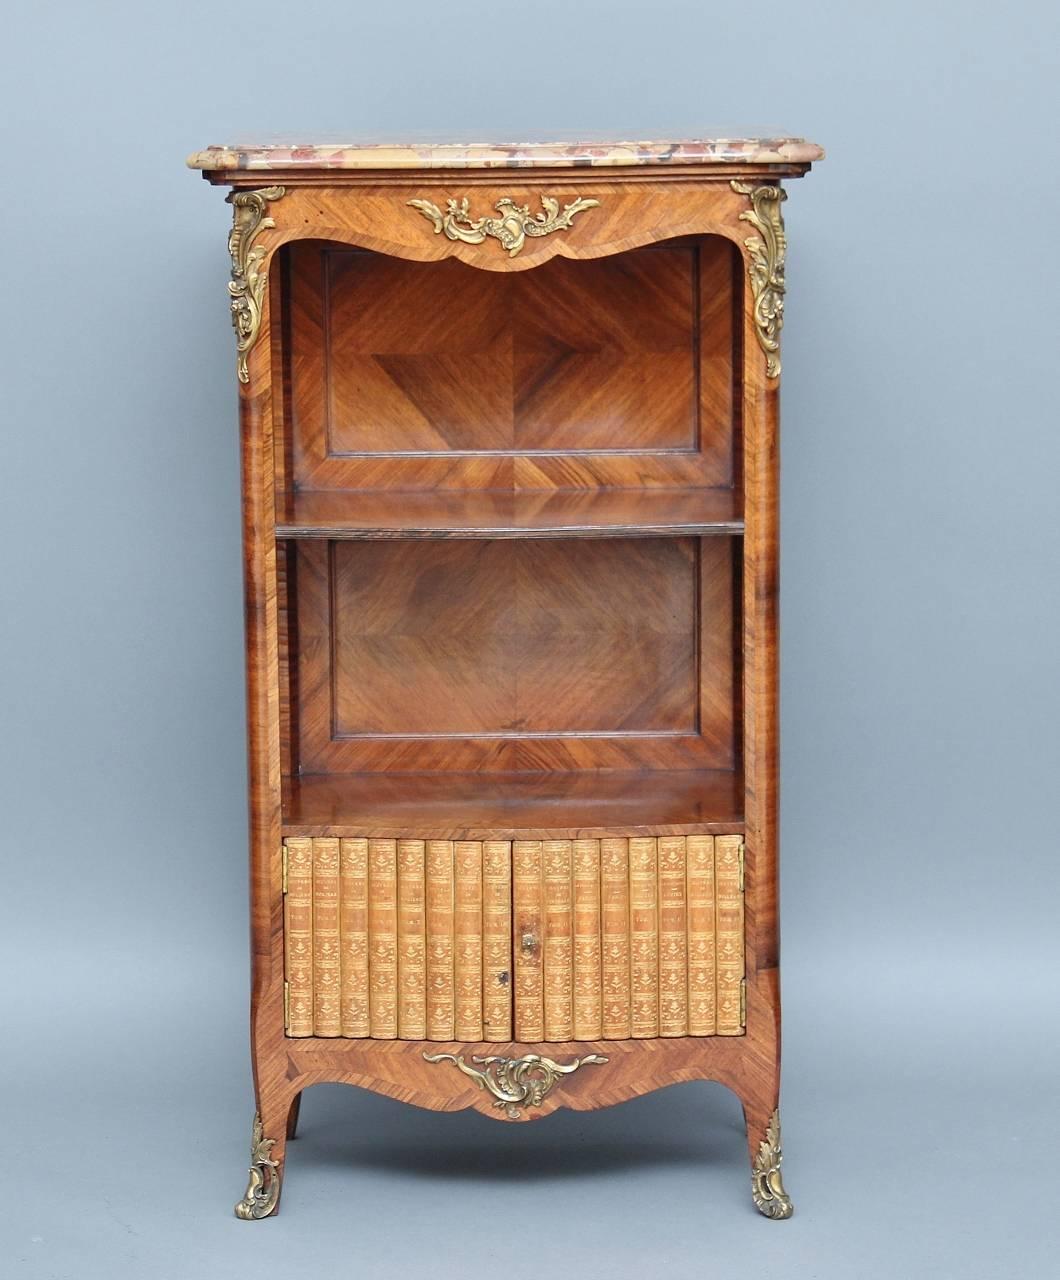 19th century French kingwood bookcase or cabinet with a shaped variegated marble top with a moulded edge, below a nicely shaped frieze along the front and sides, the bookcase is crossbanded all over decorated with lovely quality brass mounts, with a